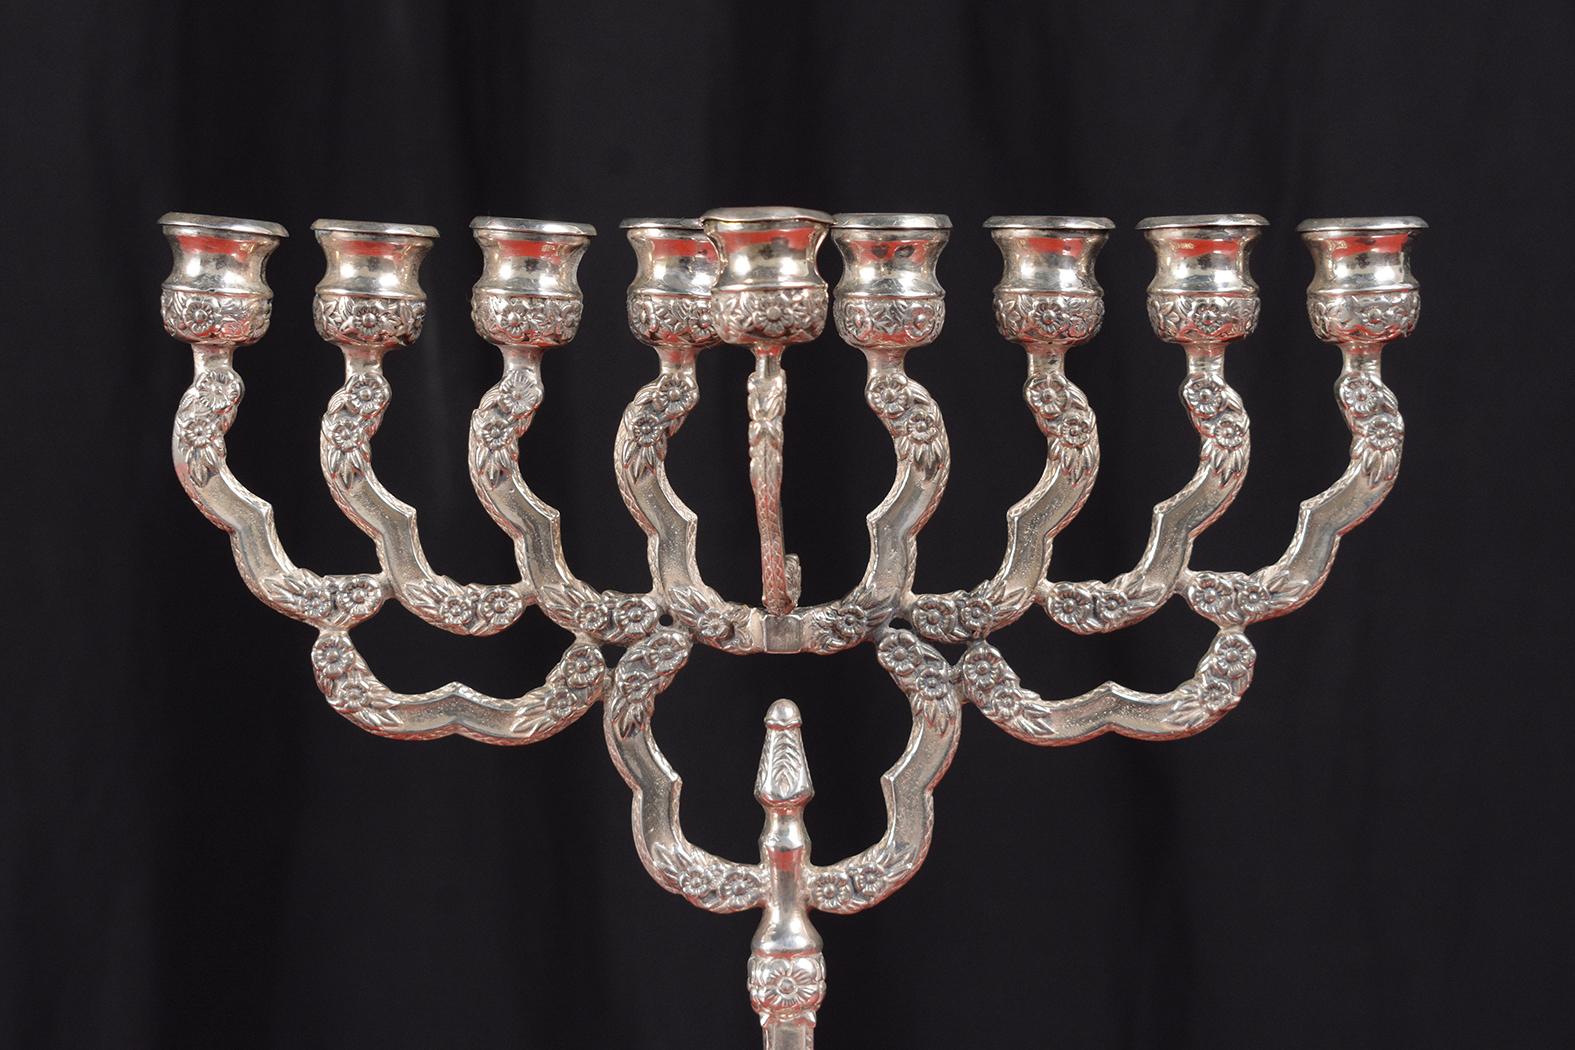 Metal Timeless Sterling Silver Menorah from Israel with Floral Motif